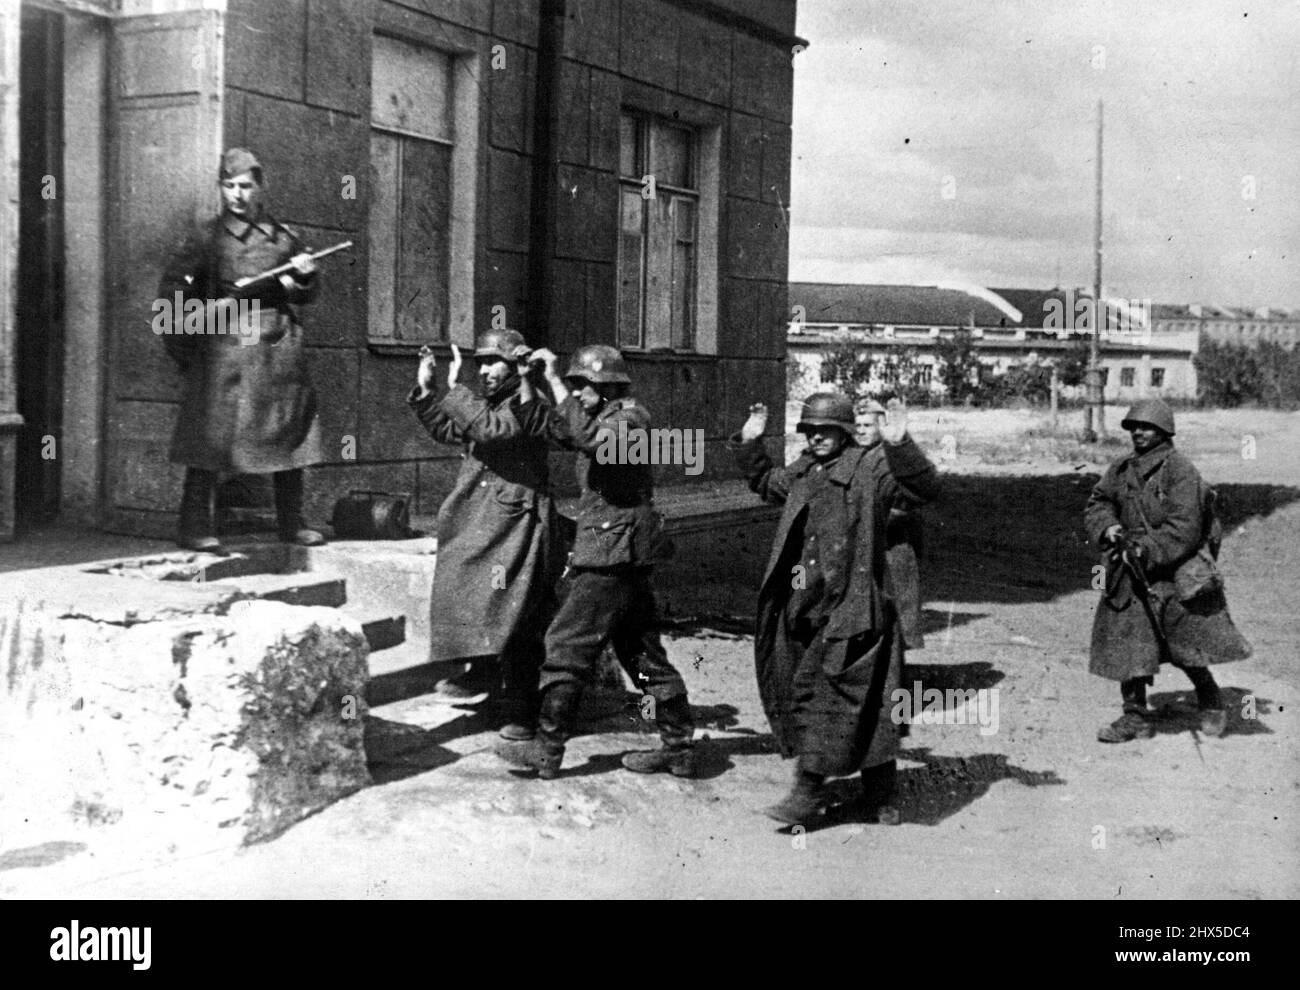 Nazi Prisoners in Russian Hands. Steelhelmeted Nazis, with arms raised in surrender, are marched into staff headquarters for interrogation, at the Voronezh front. March 18, 1944. (Photo by Pictorial Press). Stock Photo